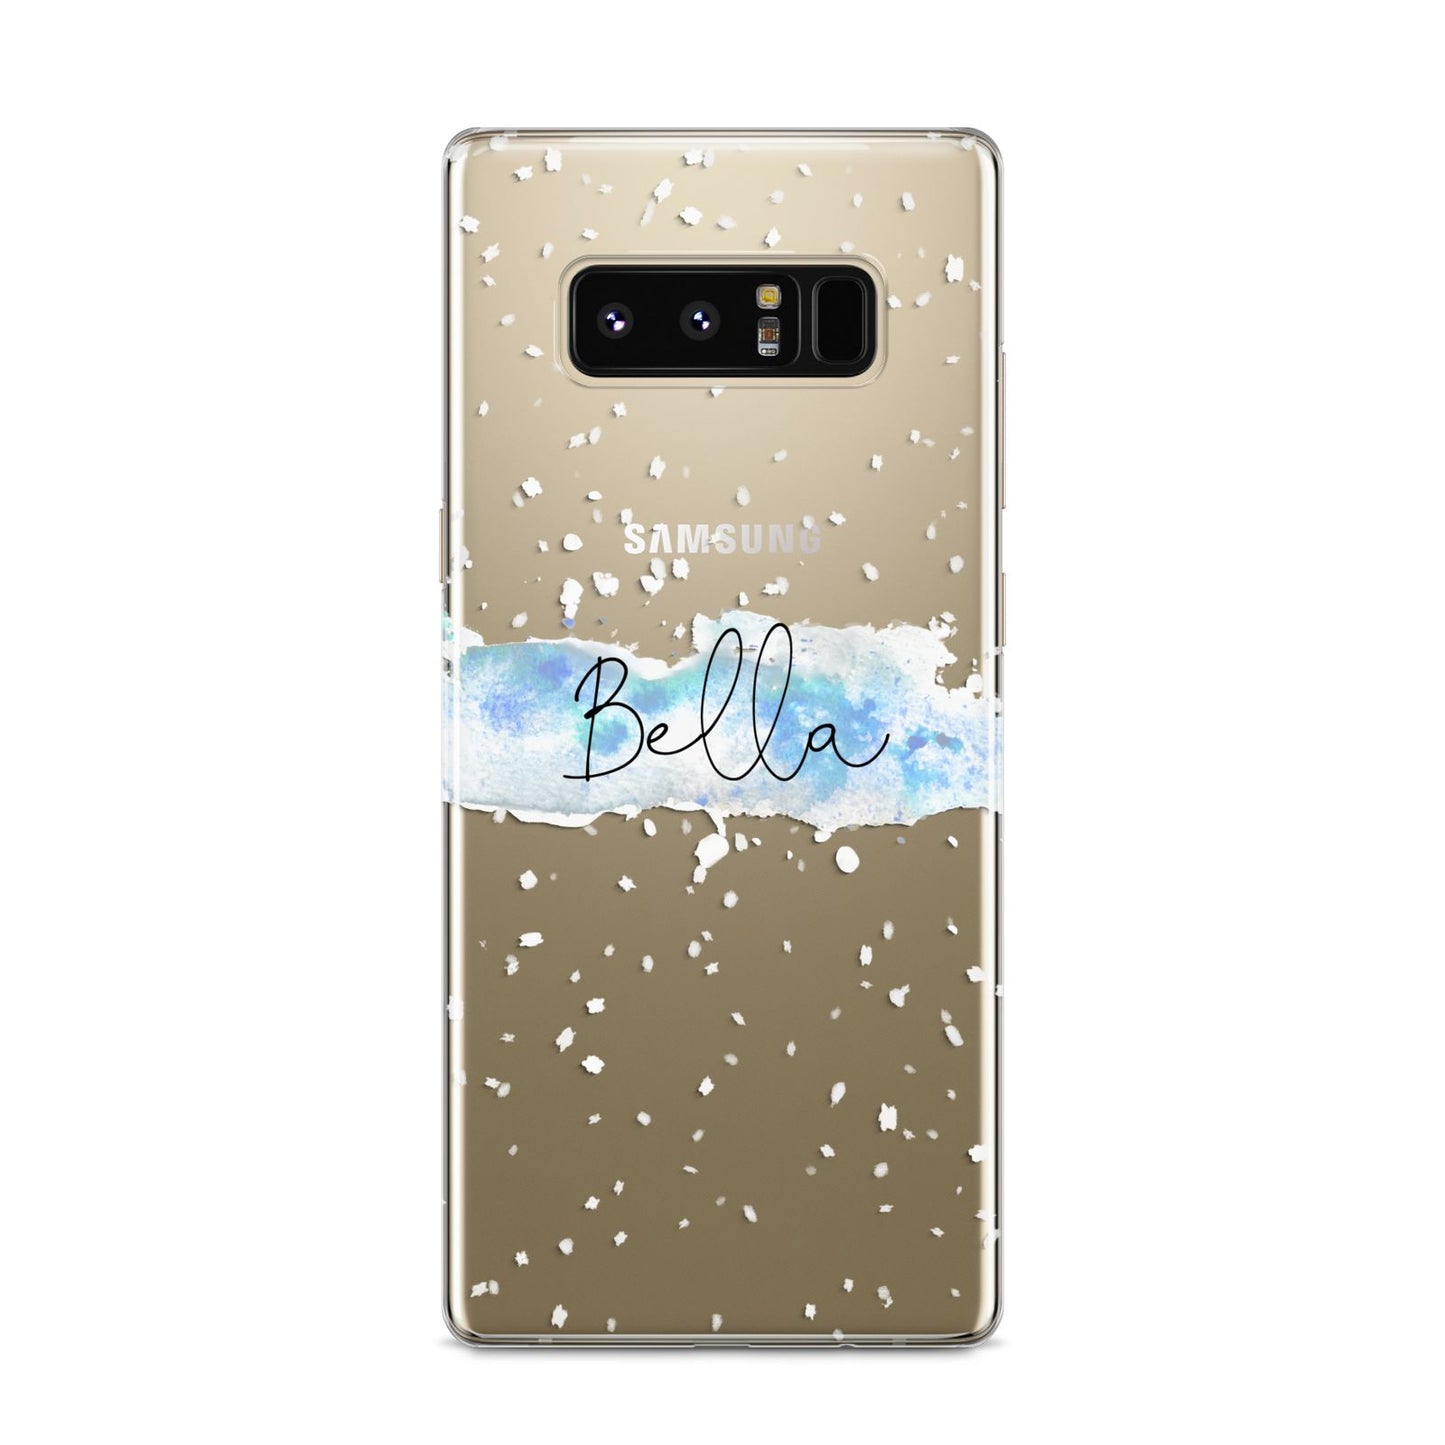 Personalised Christmas Snow fall Samsung Galaxy S8 Case